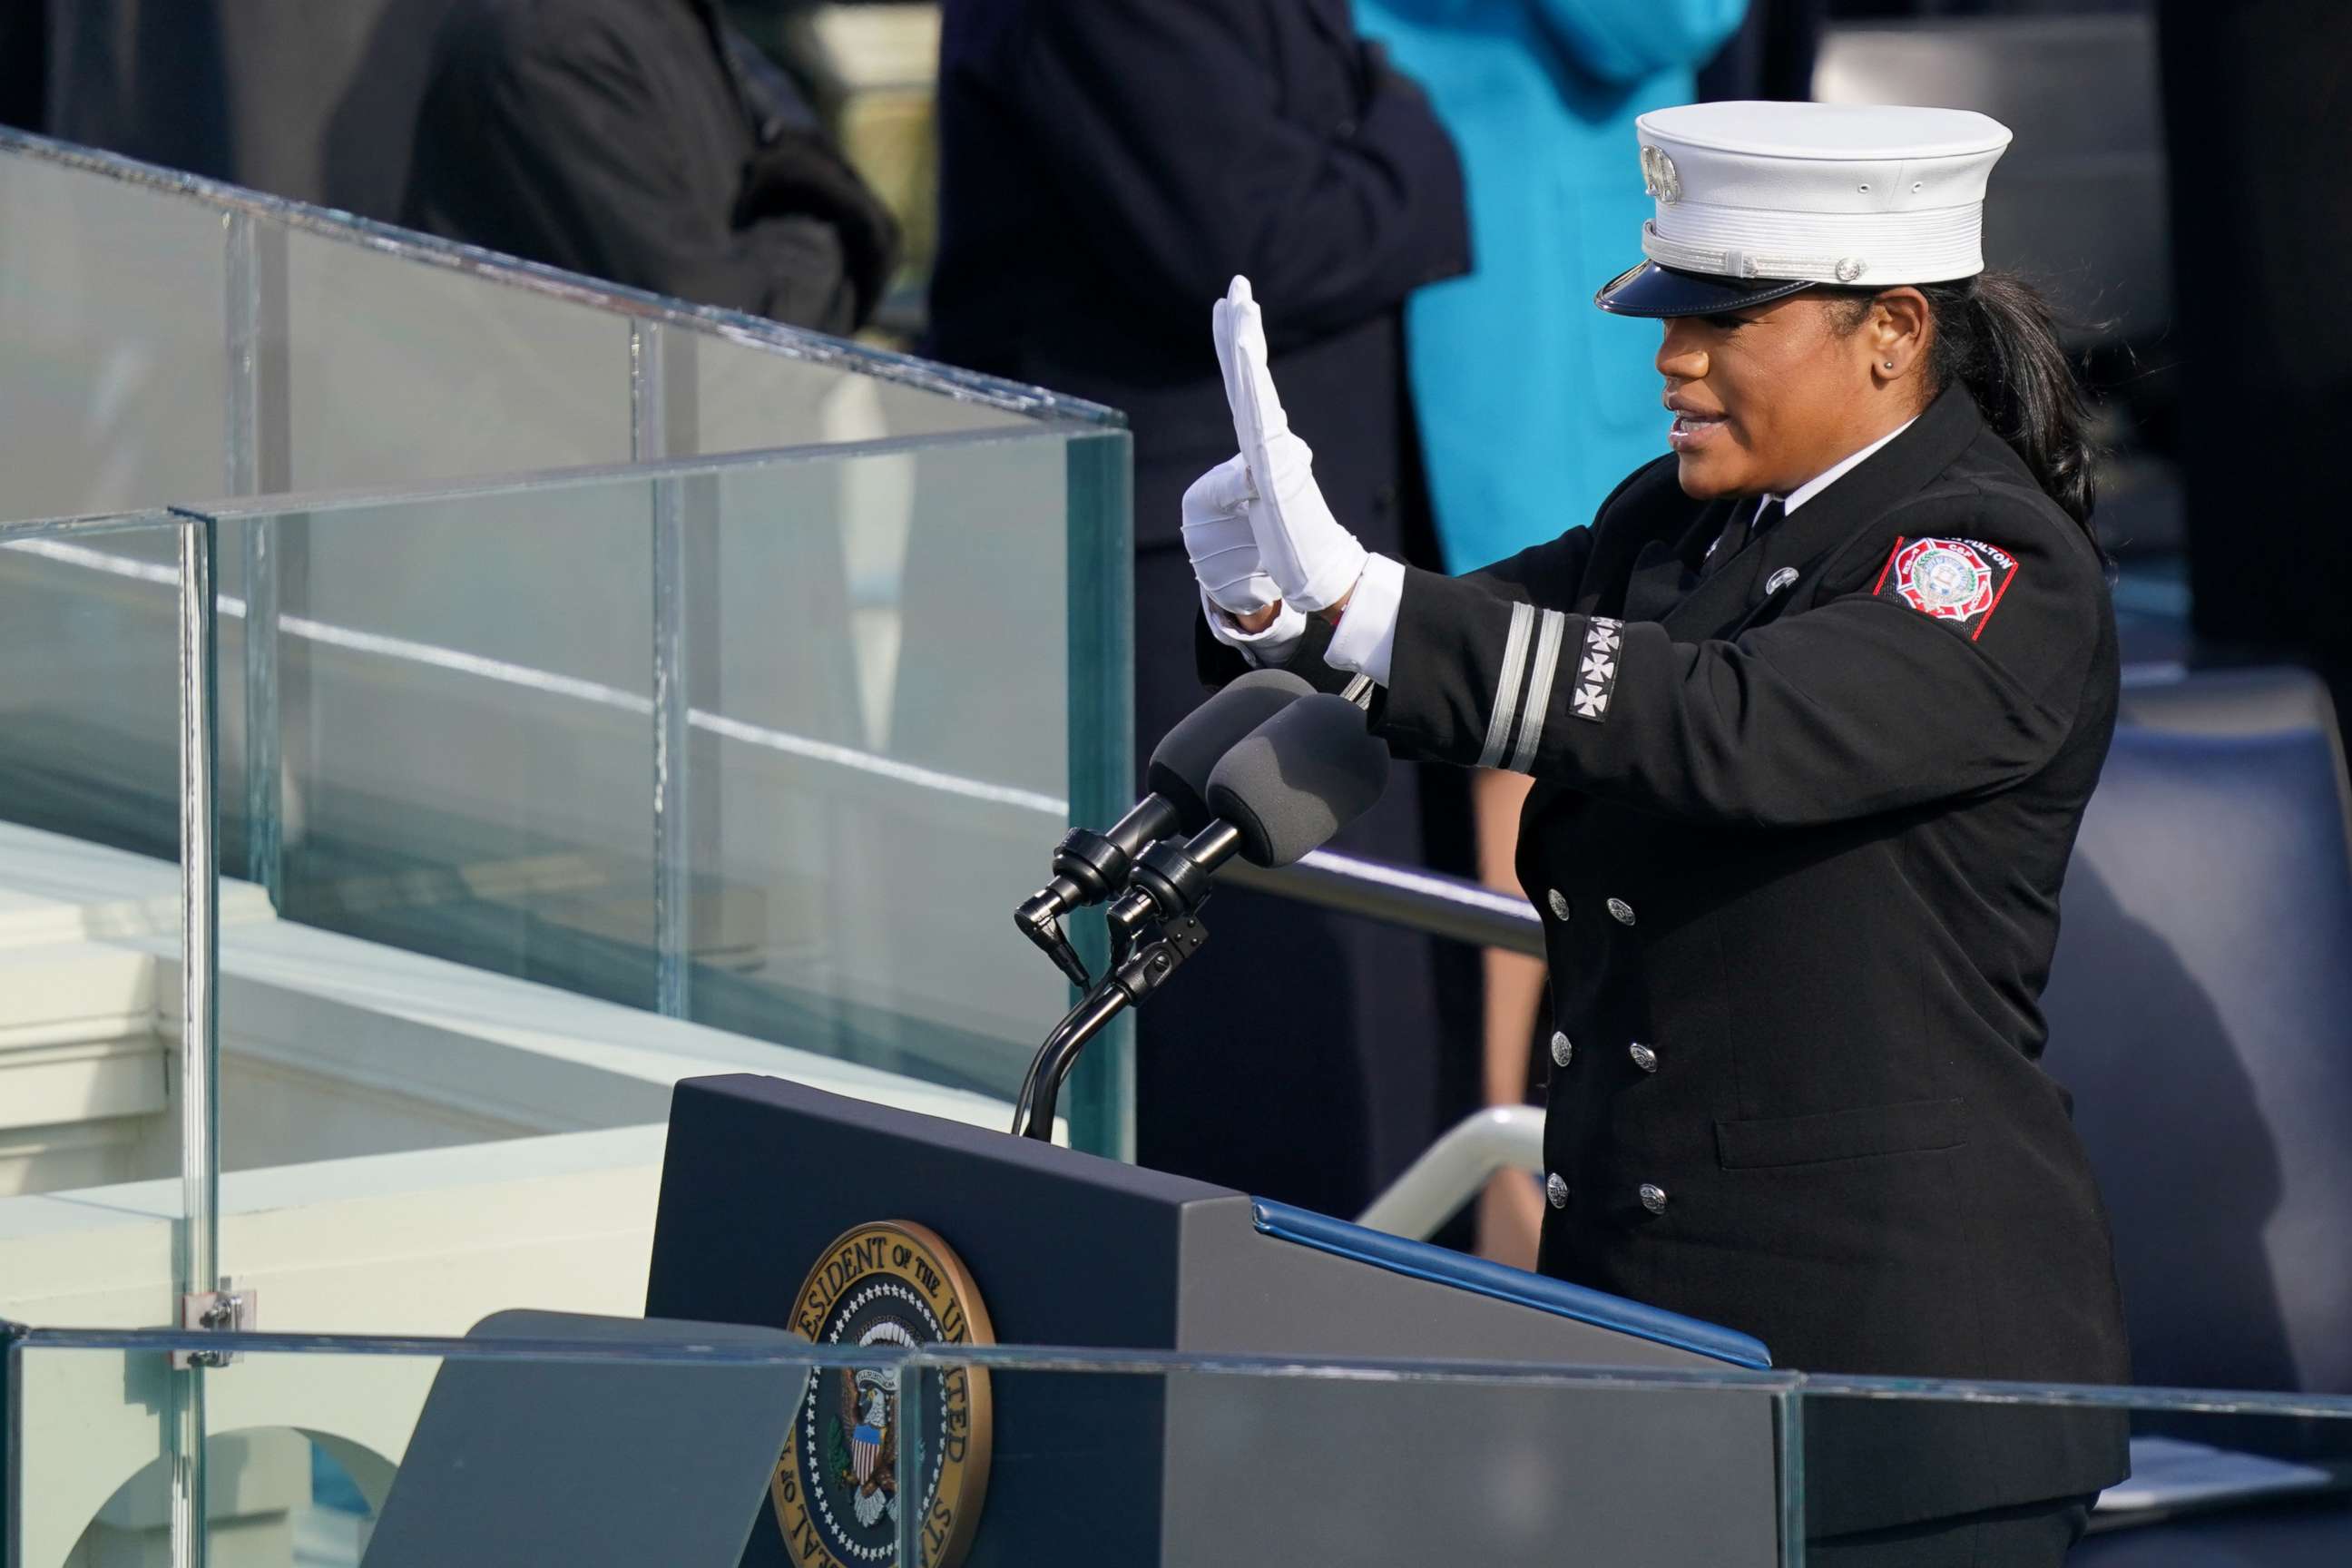 PHOTO: Capt. Andrea Hall of the city of South Fulton deliveres the pledge of allegiance during the 59th Presidential Inauguration at the U.S. Capitol in Washington, Jan. 20, 2021.